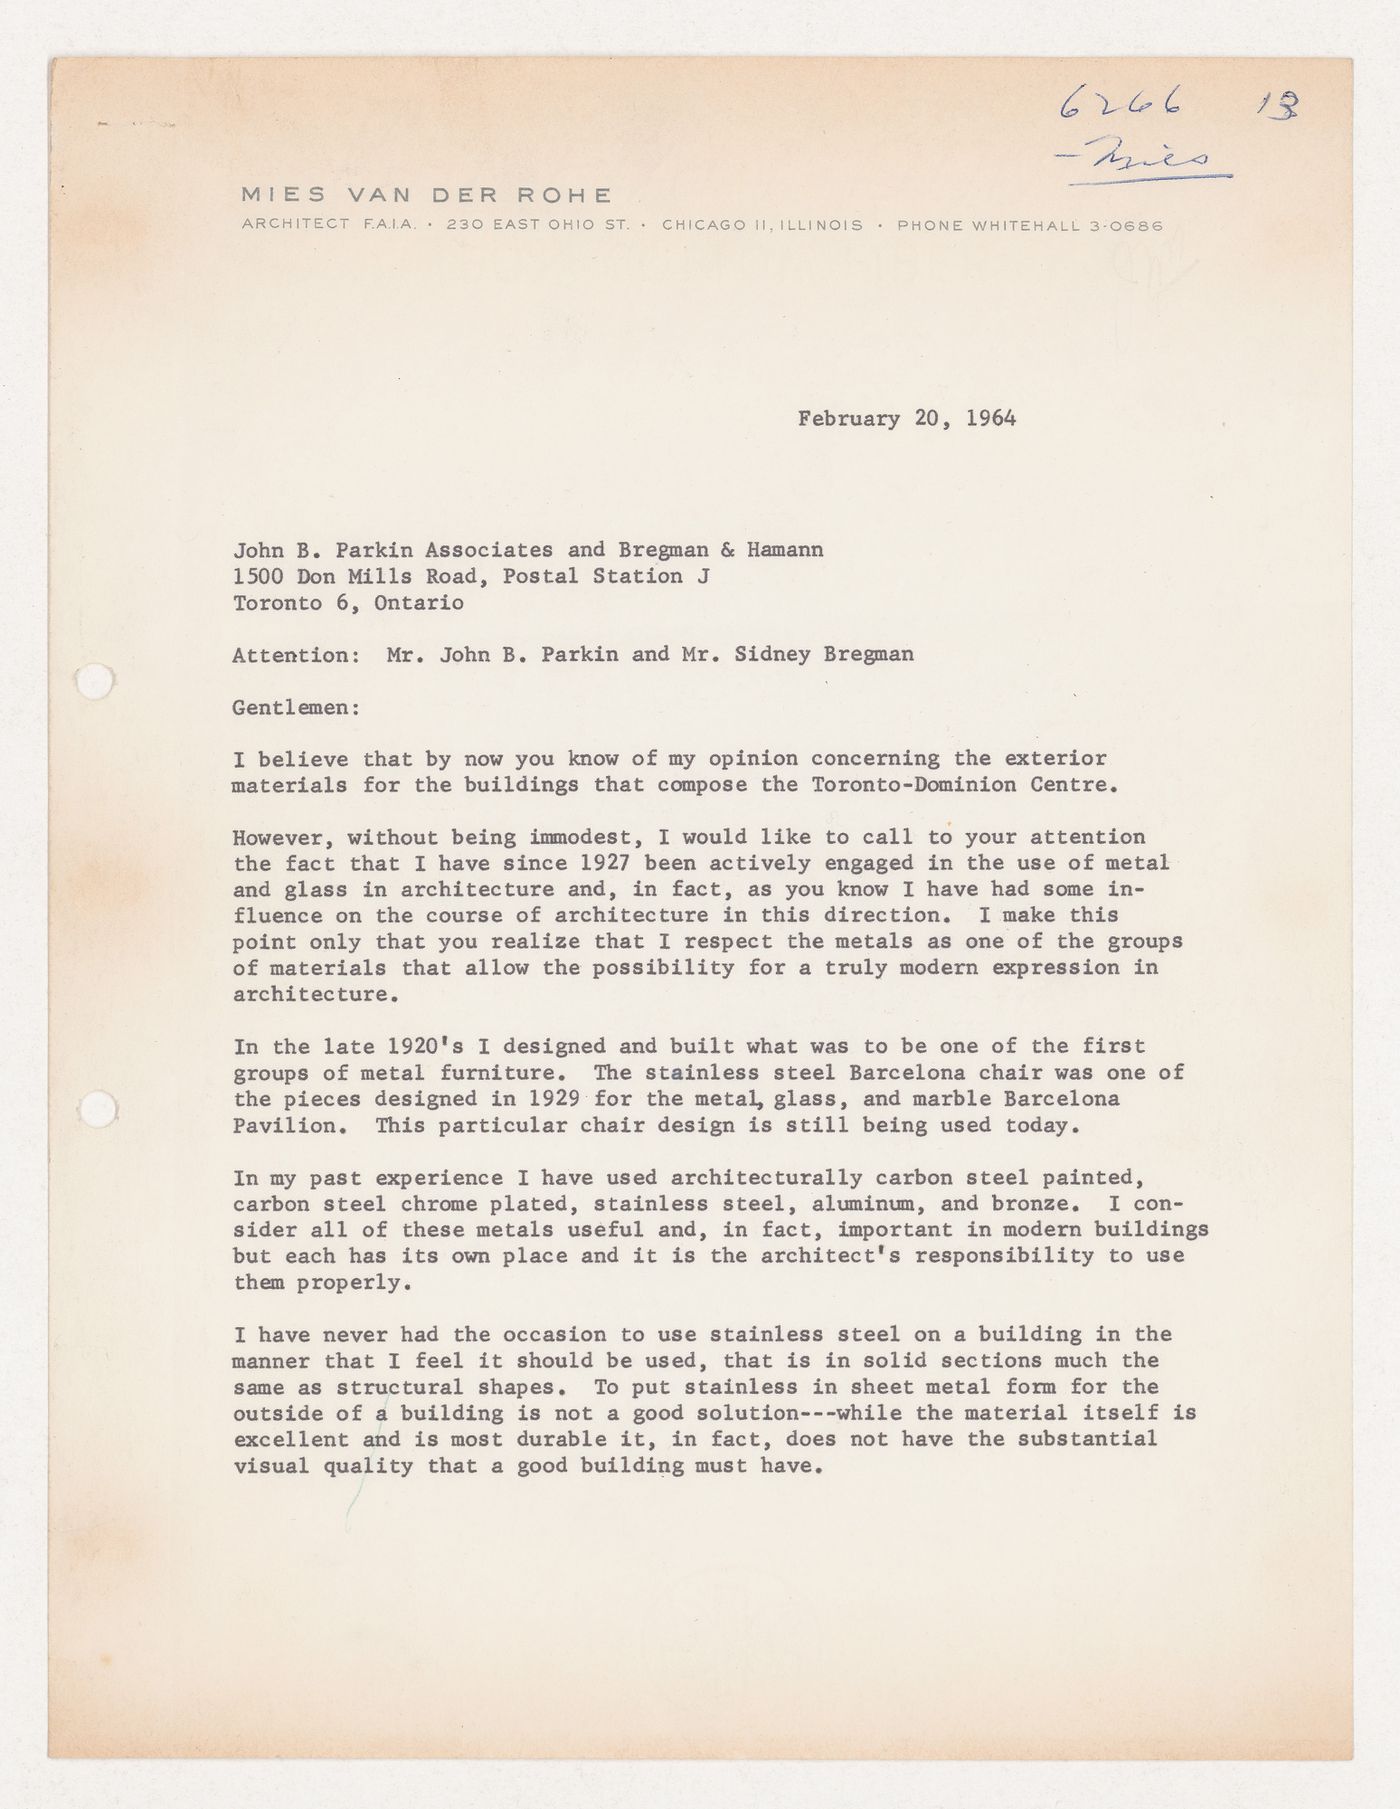 Lettre from Mies van der Rohe to John B. Parkin and Sidney Bregman about the Toronto-Dominion Centre in Toronto, Canada